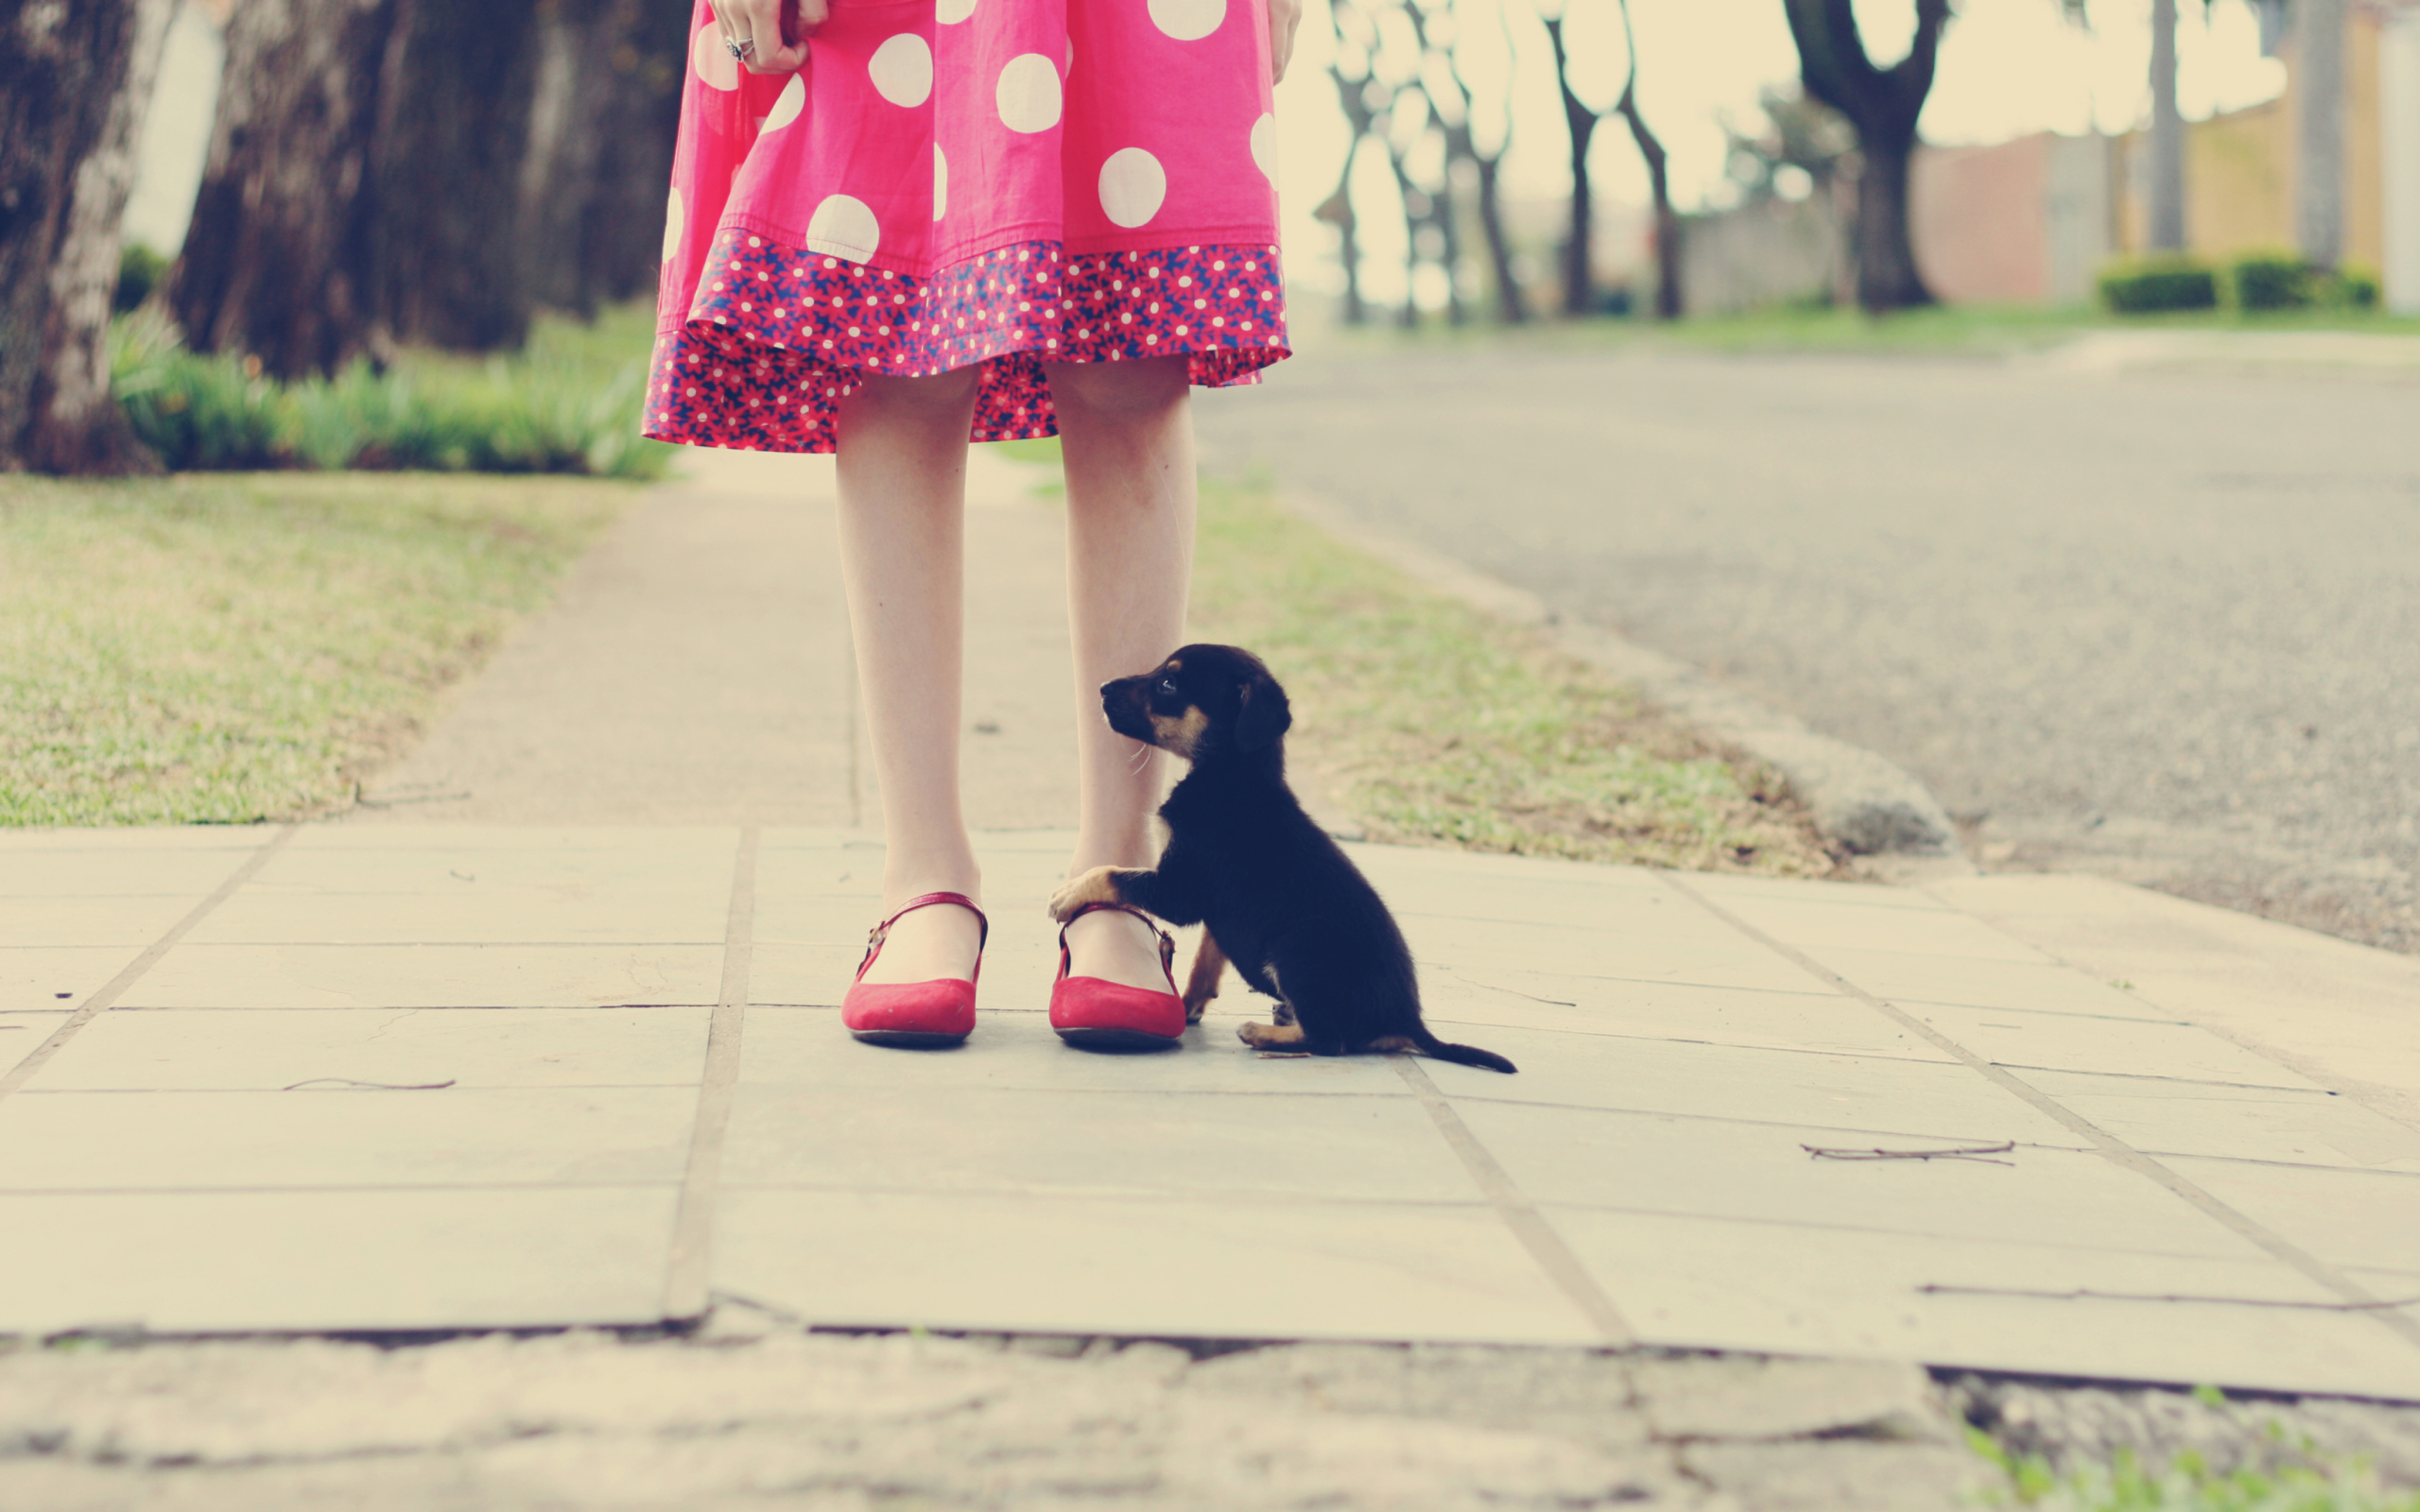 Girl In Polka Dot Dress And Her Puppy wallpaper 2560x1600